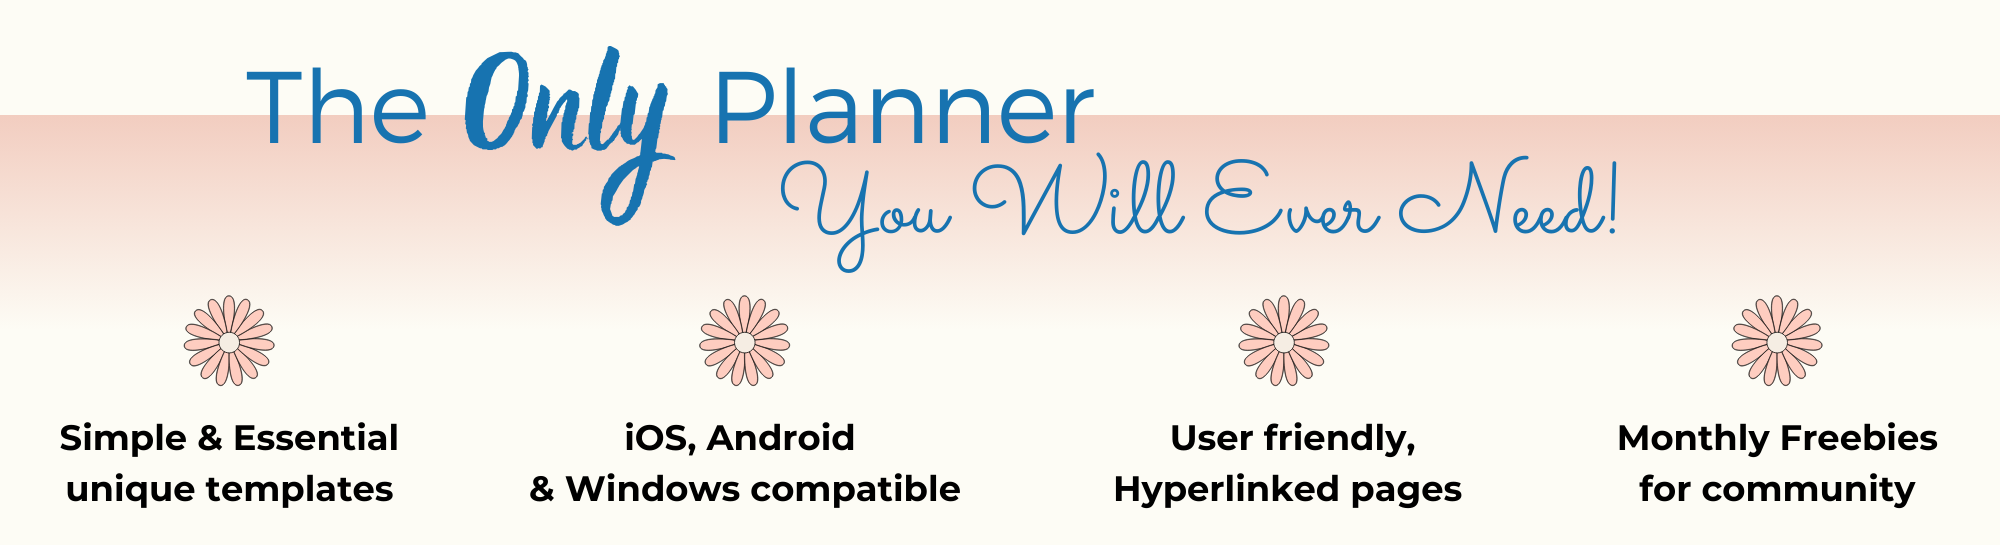 Only planner you will ever need. Simple and easy planners. Digital planners. Freebies.